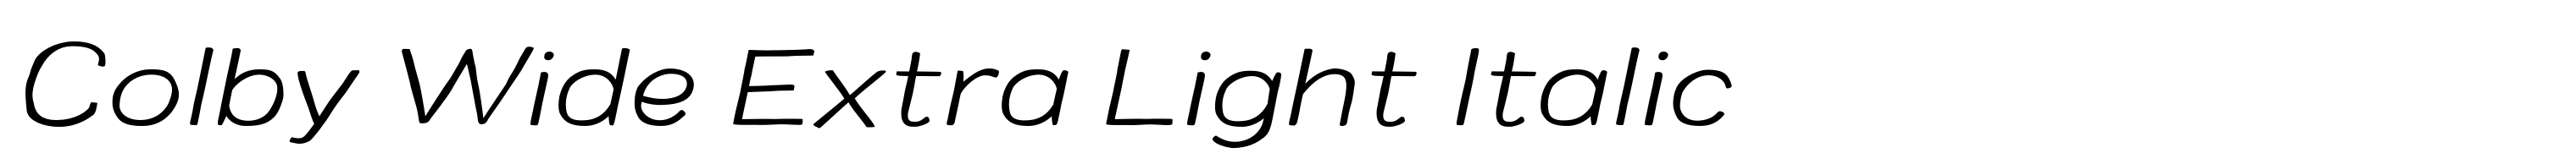 Colby Wide Extra Light Italic